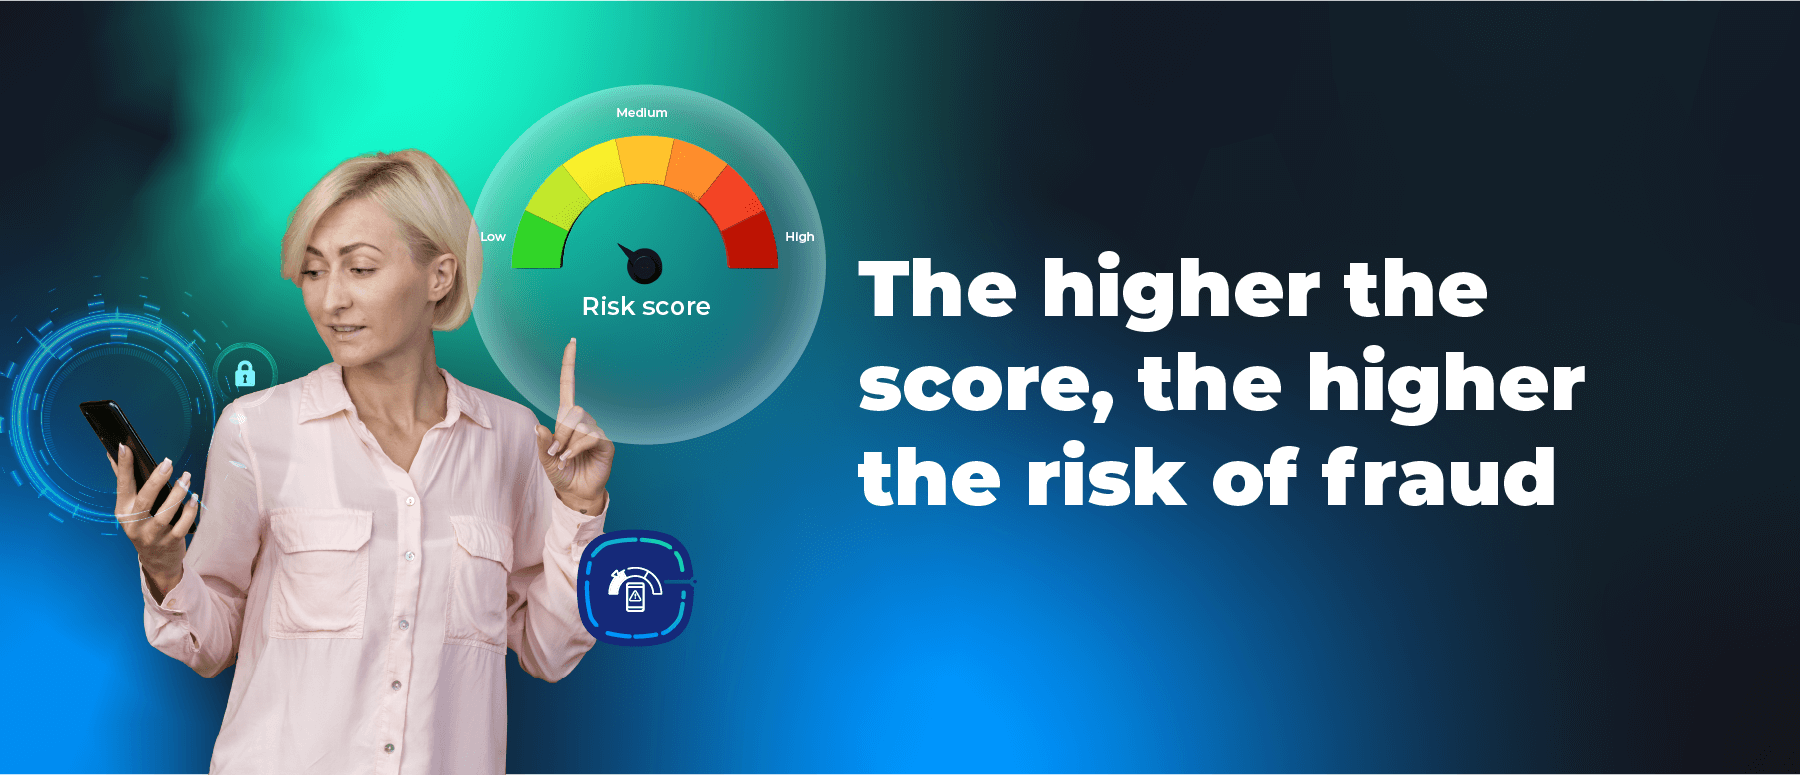 A higher risk score means more chances of fraud